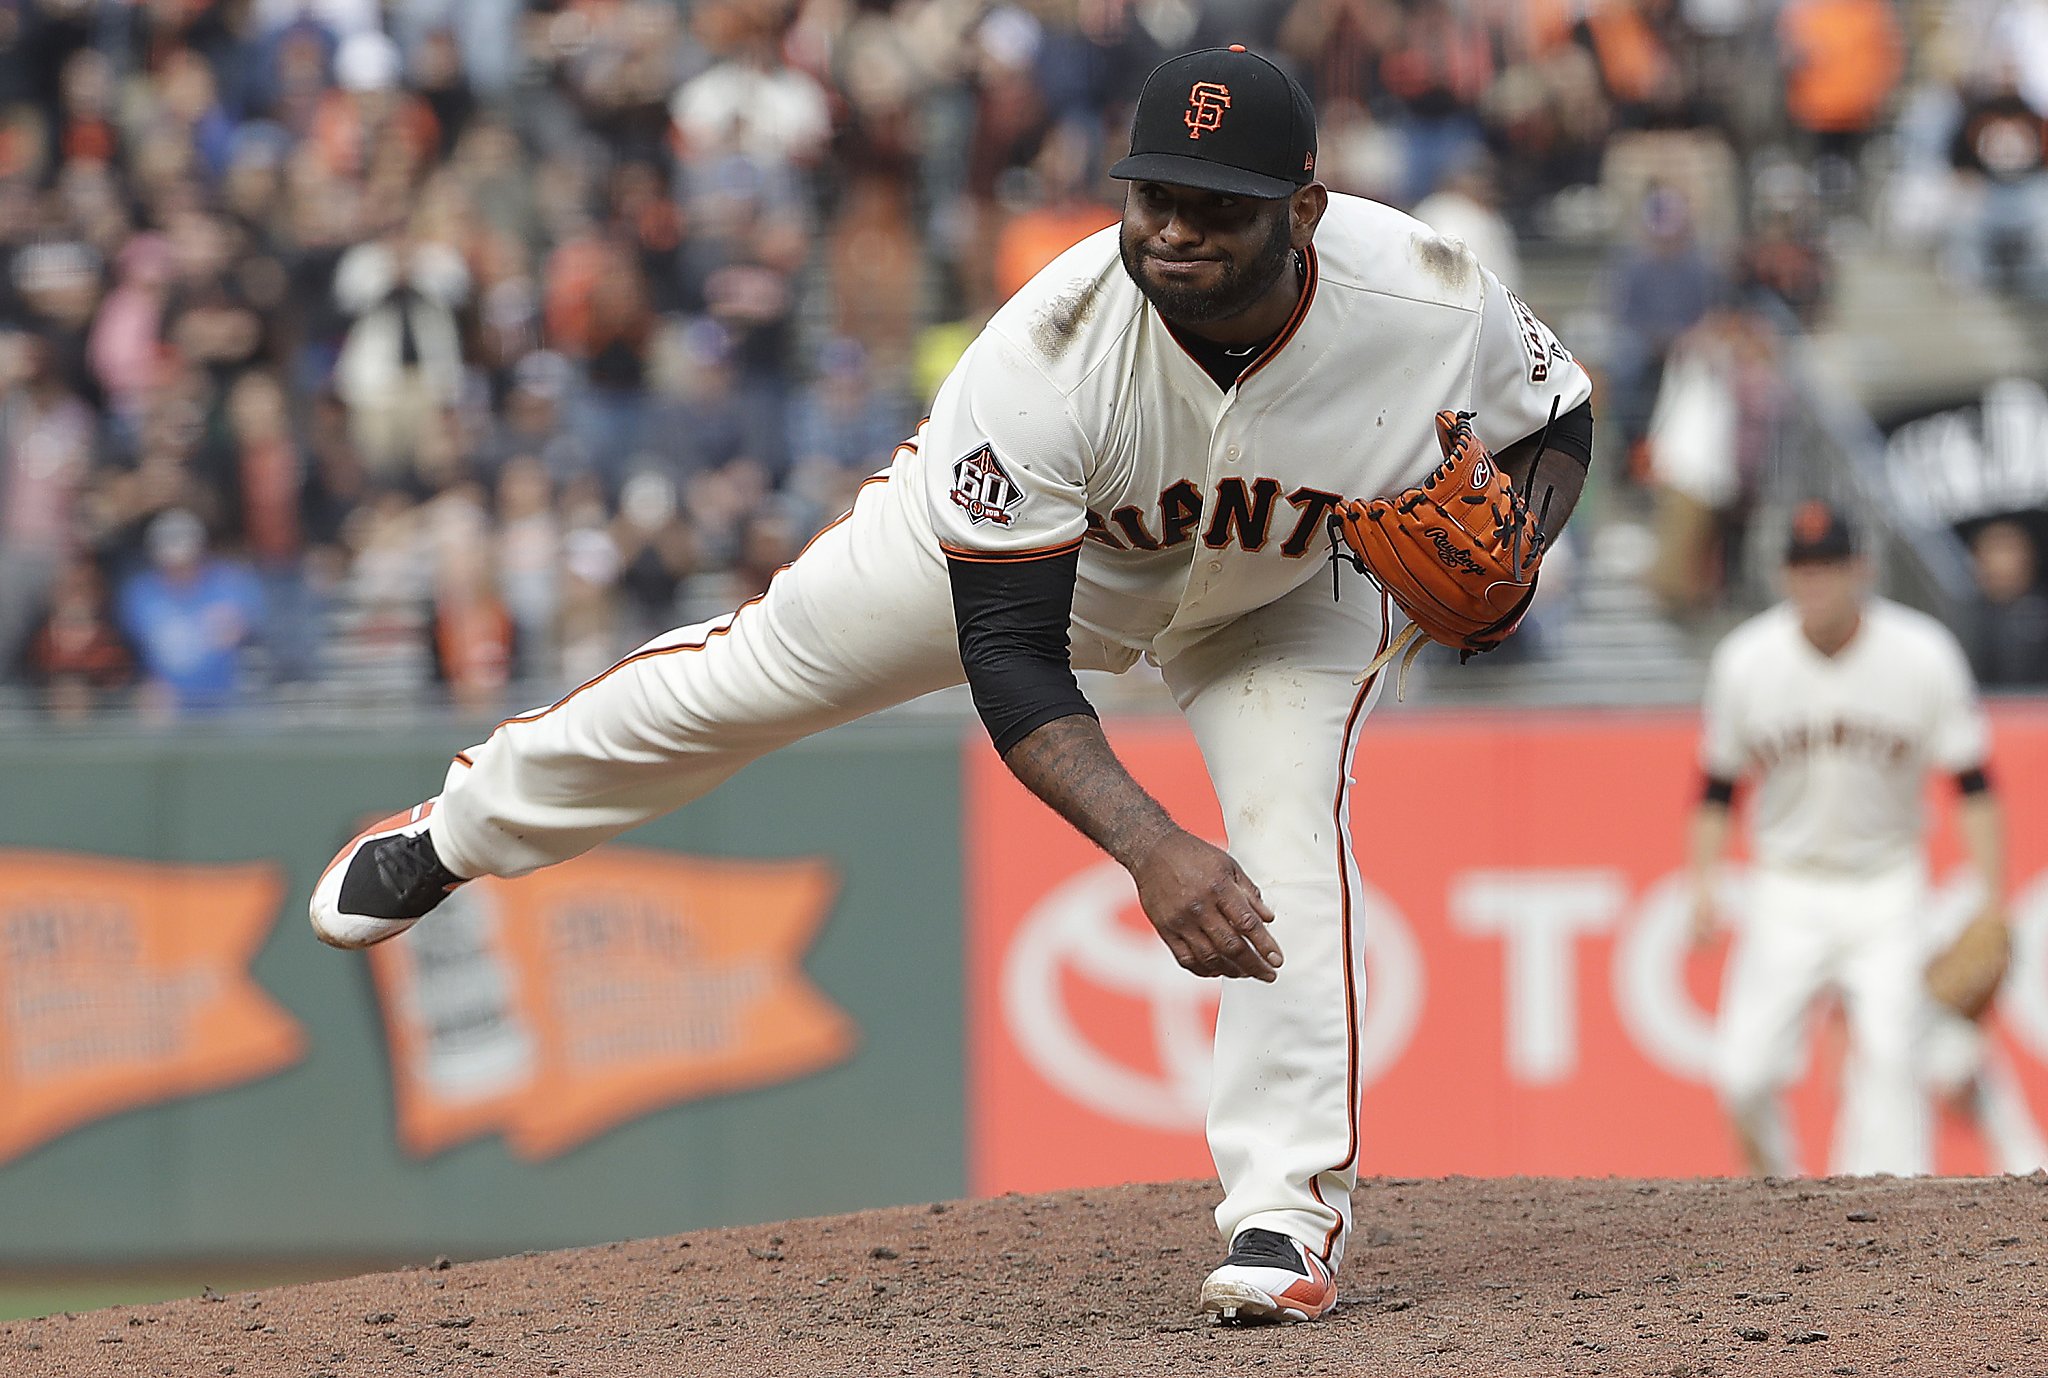 Pablo Sandoval regrets joining the Red Sox and leaving the Giants in 2014